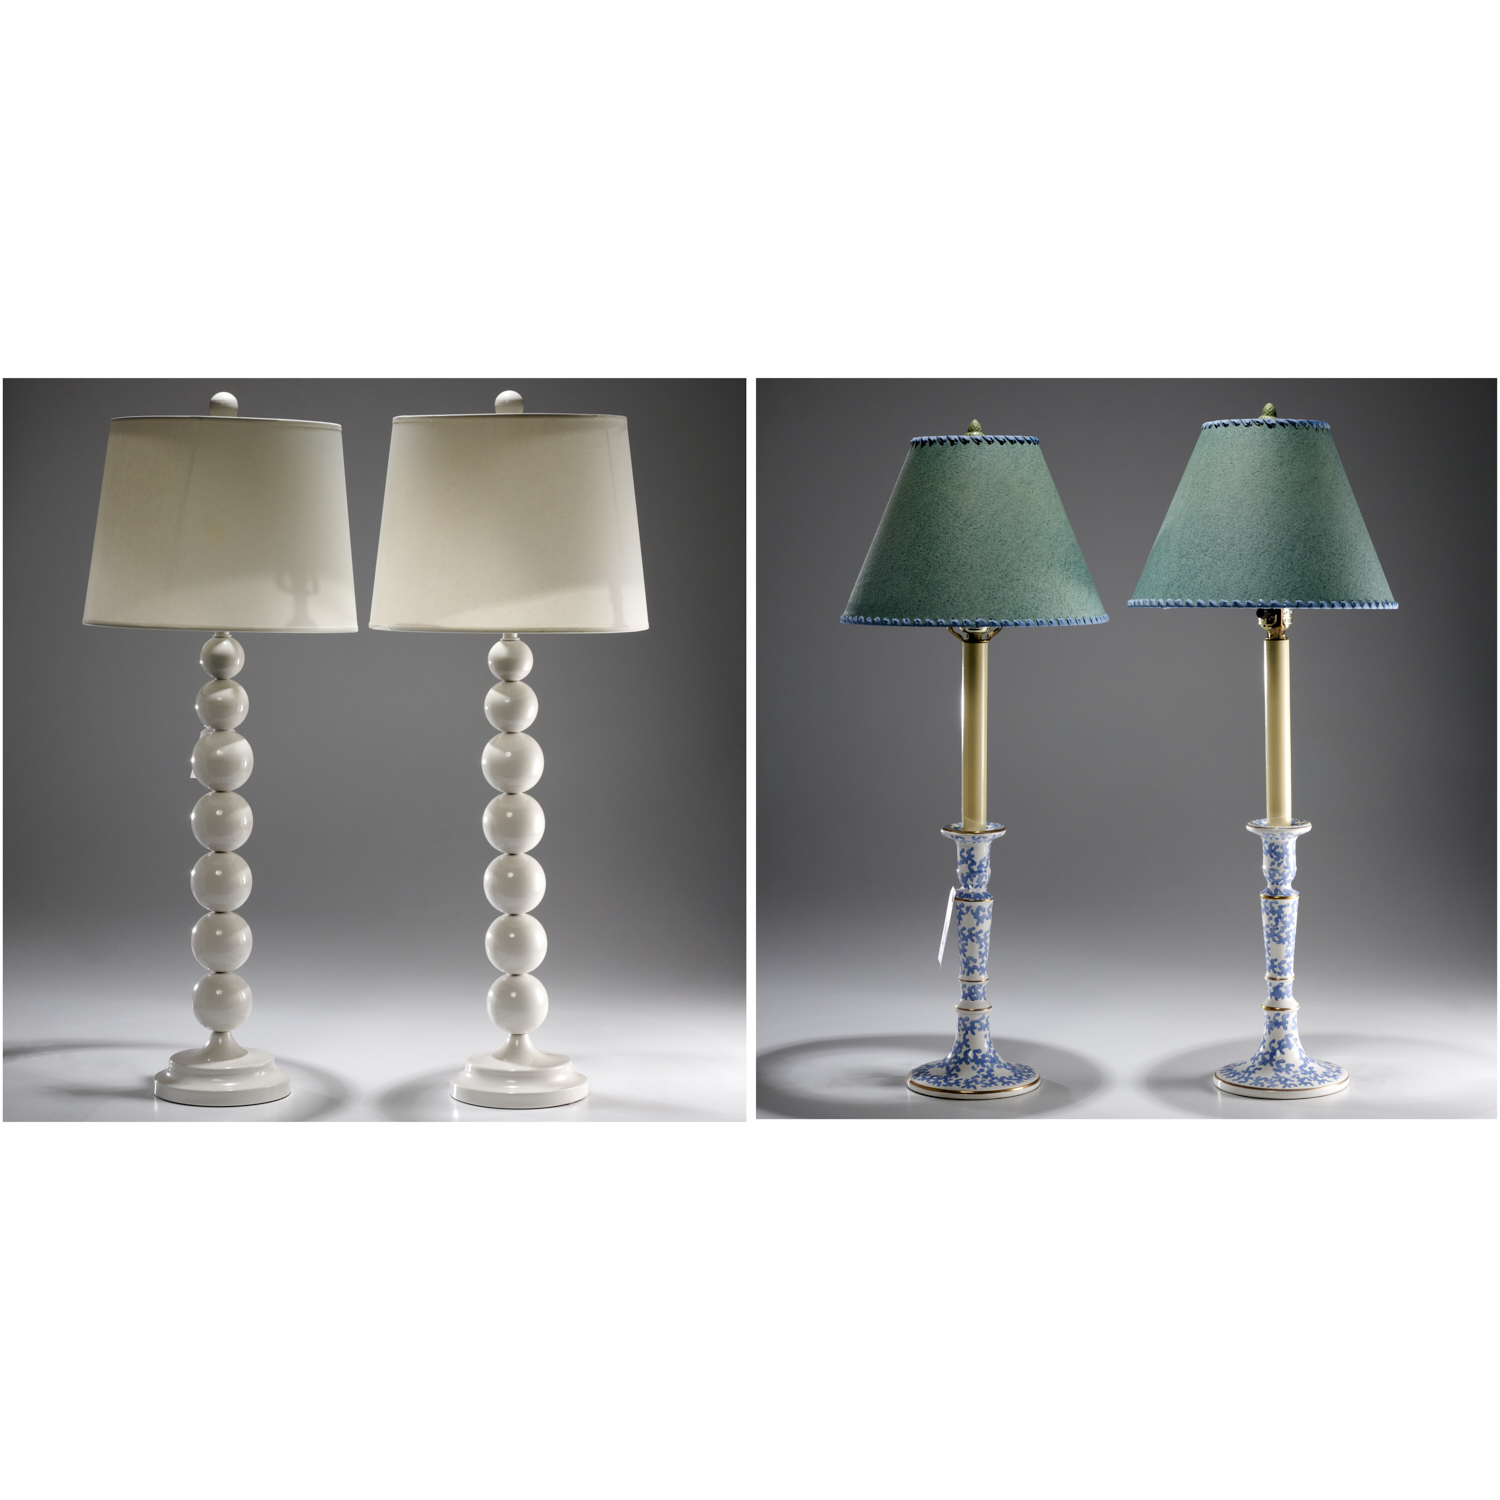  2 PAIRS MODERN TABLE LAMPS INCL  30be8a